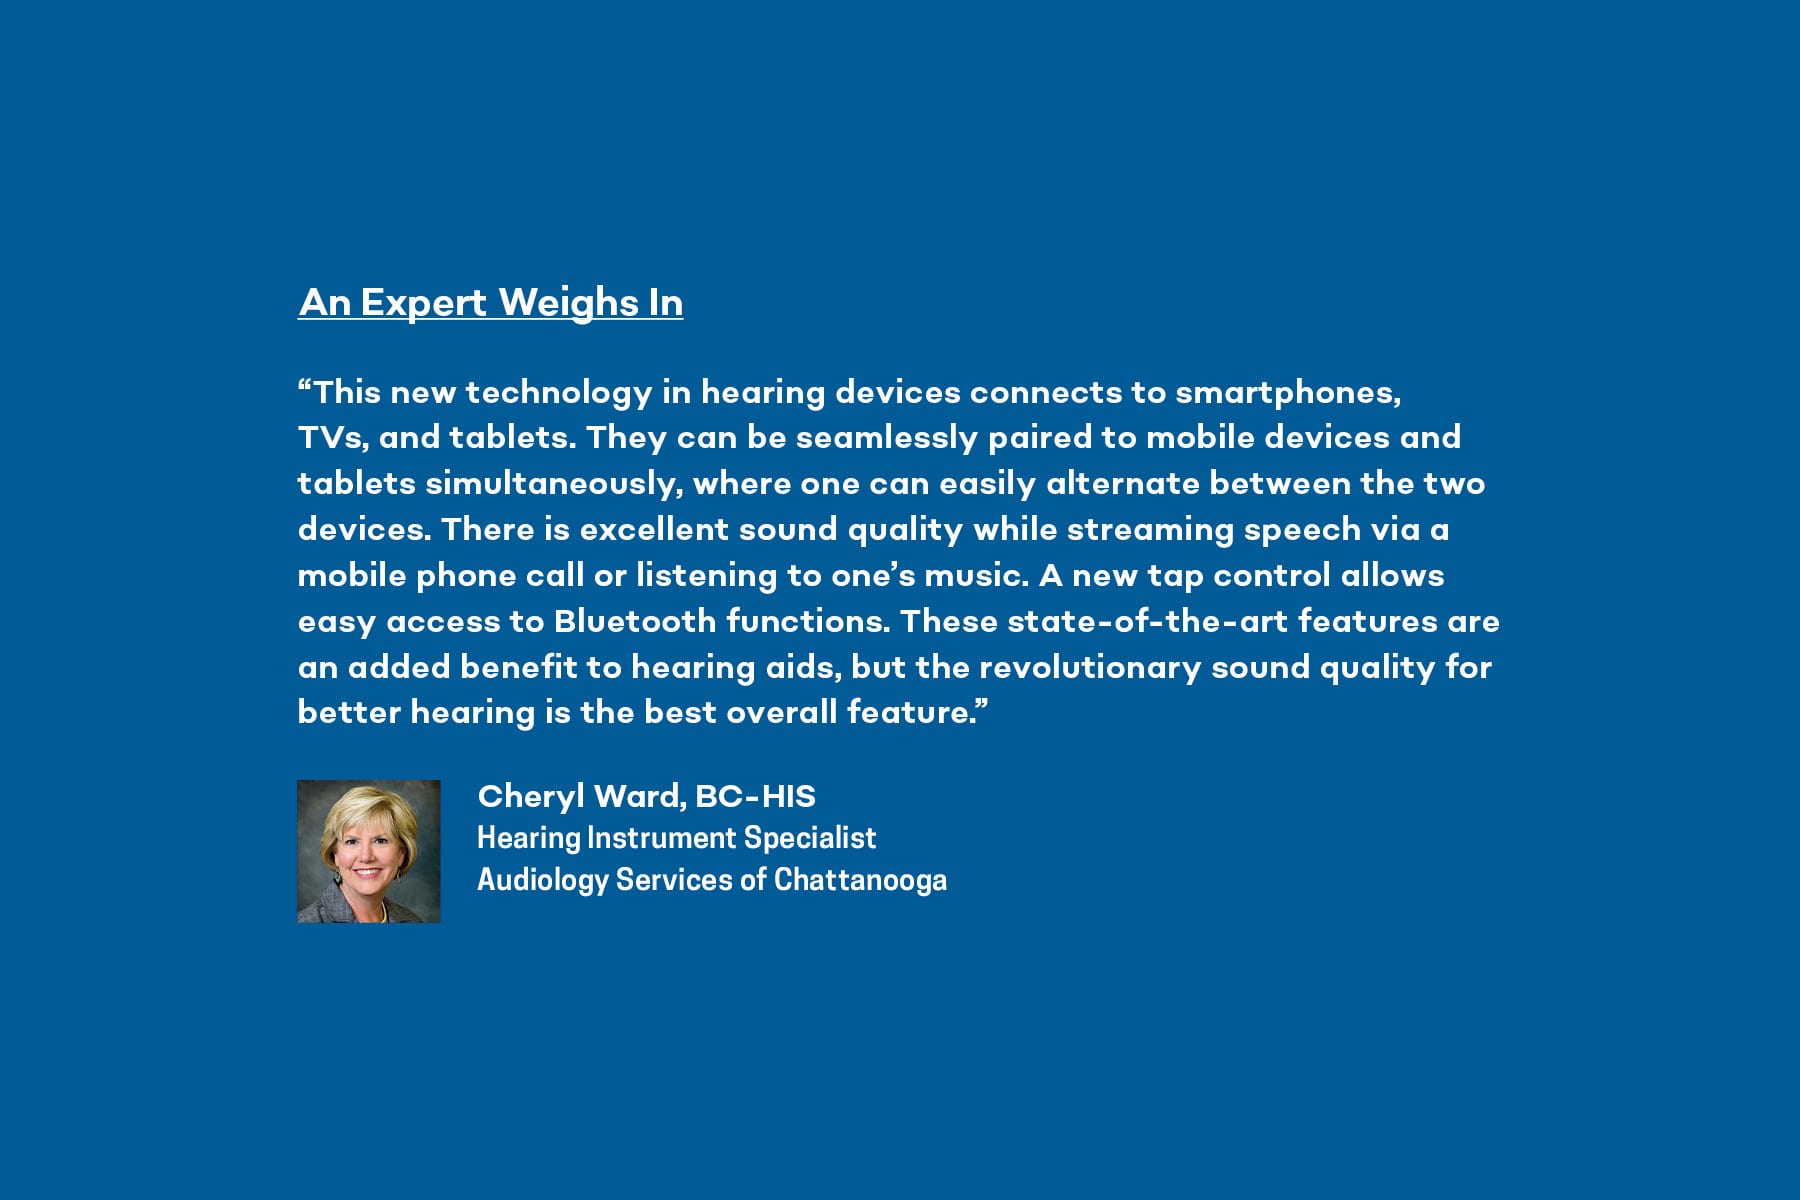 Cheryl Ward, BC-HIS shares her expert opinion on the Phonak Audéo Paradise hearing aids